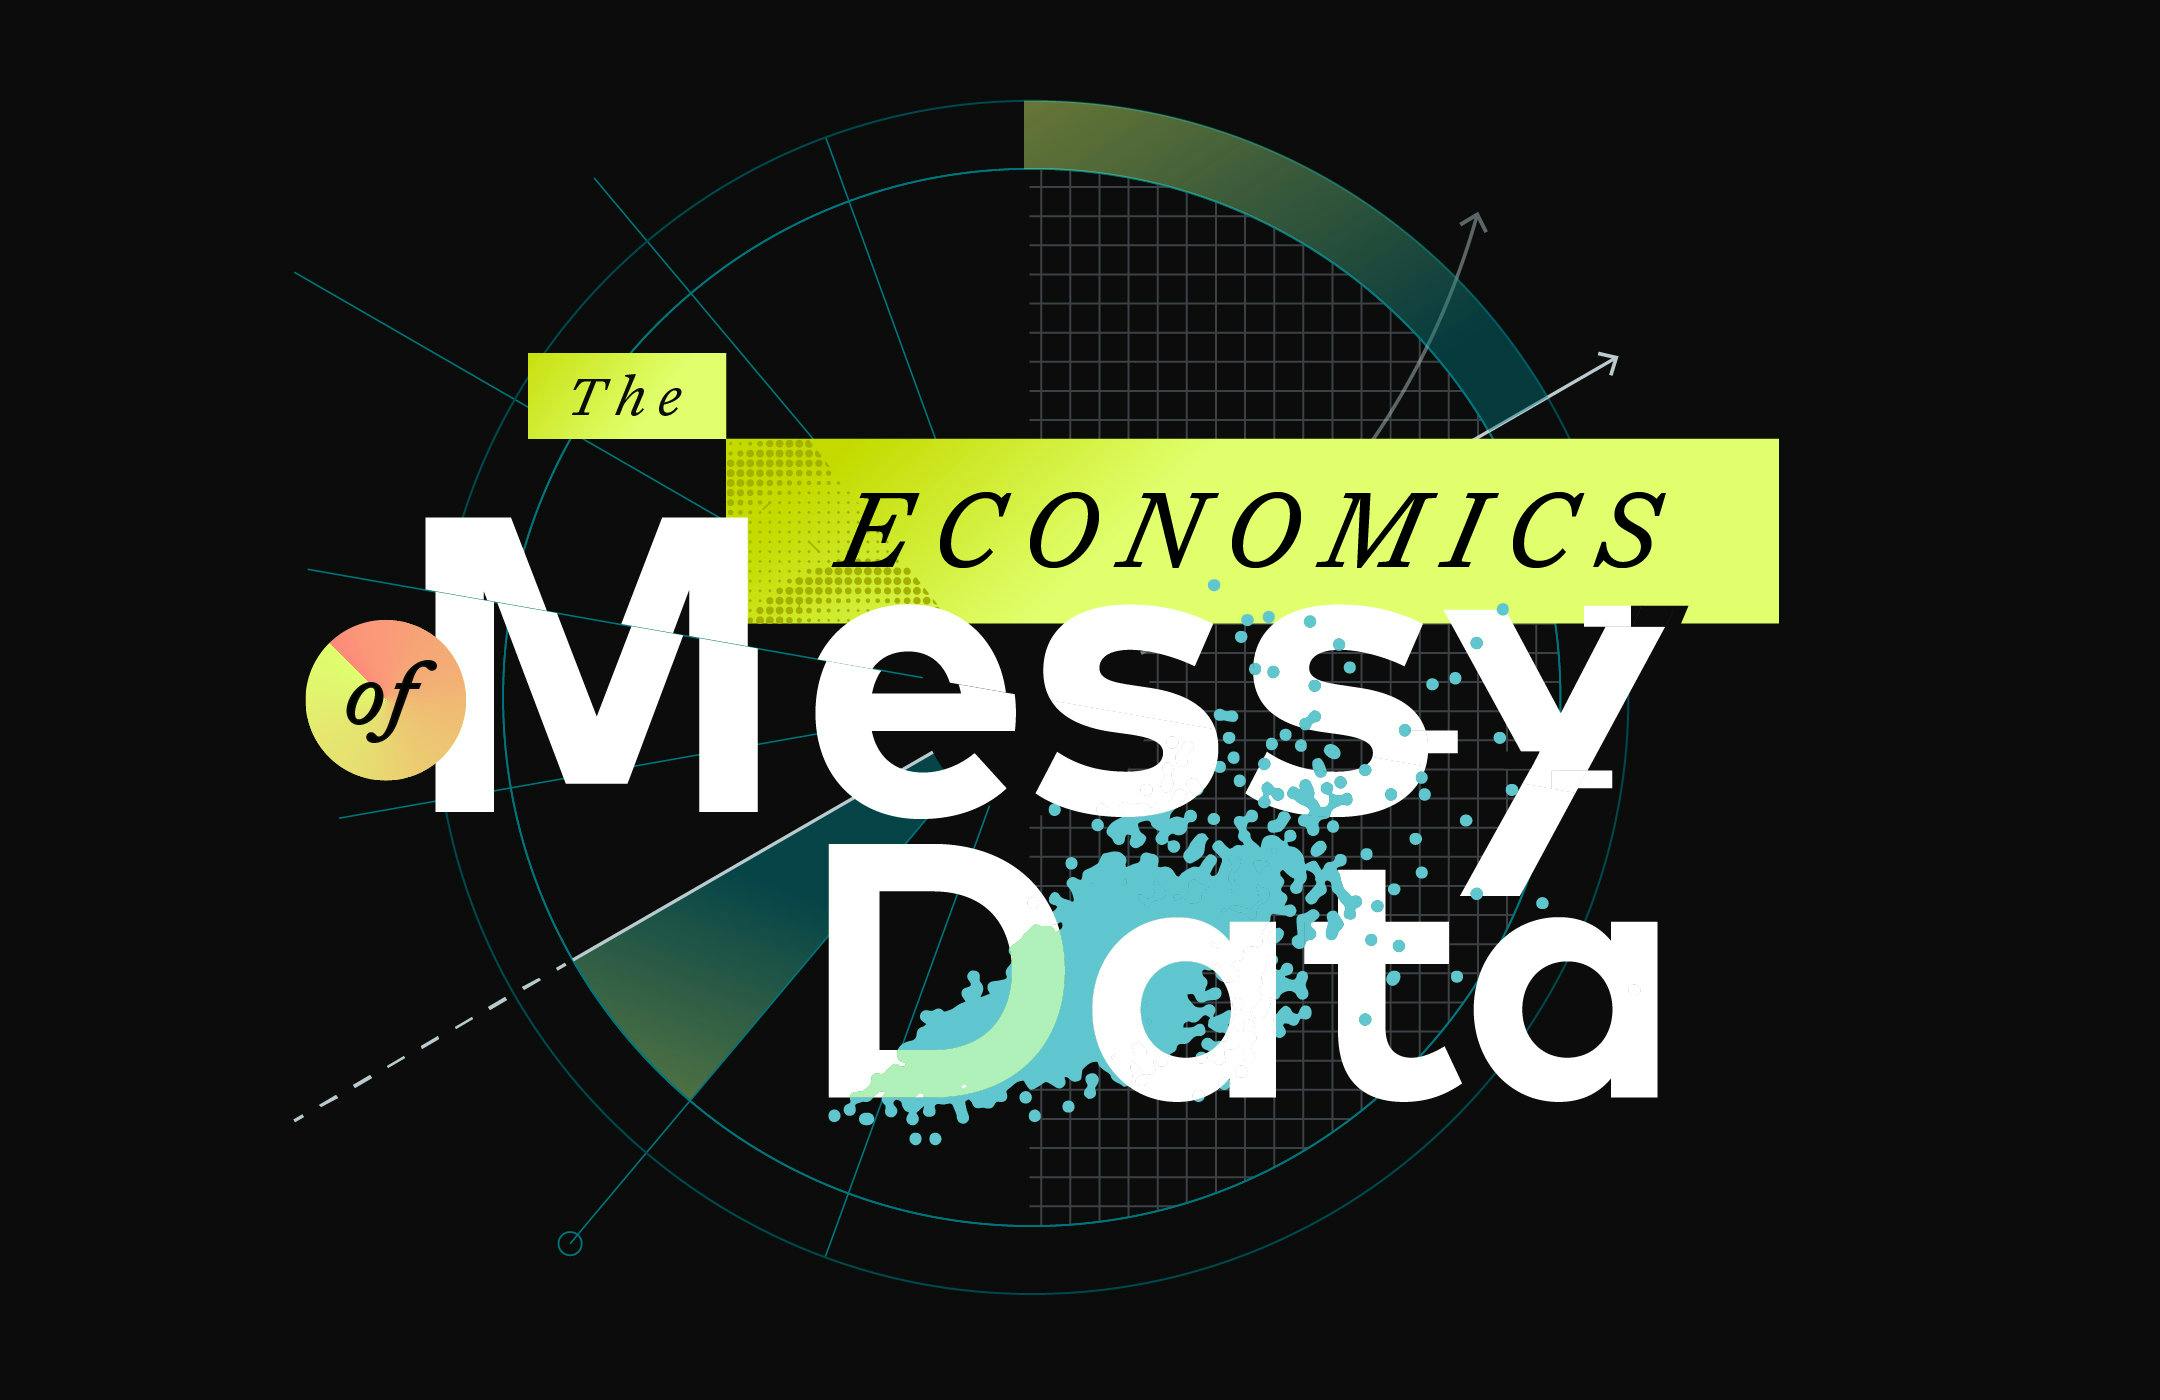 Illustrated hero image of the text "The economics of messy data"